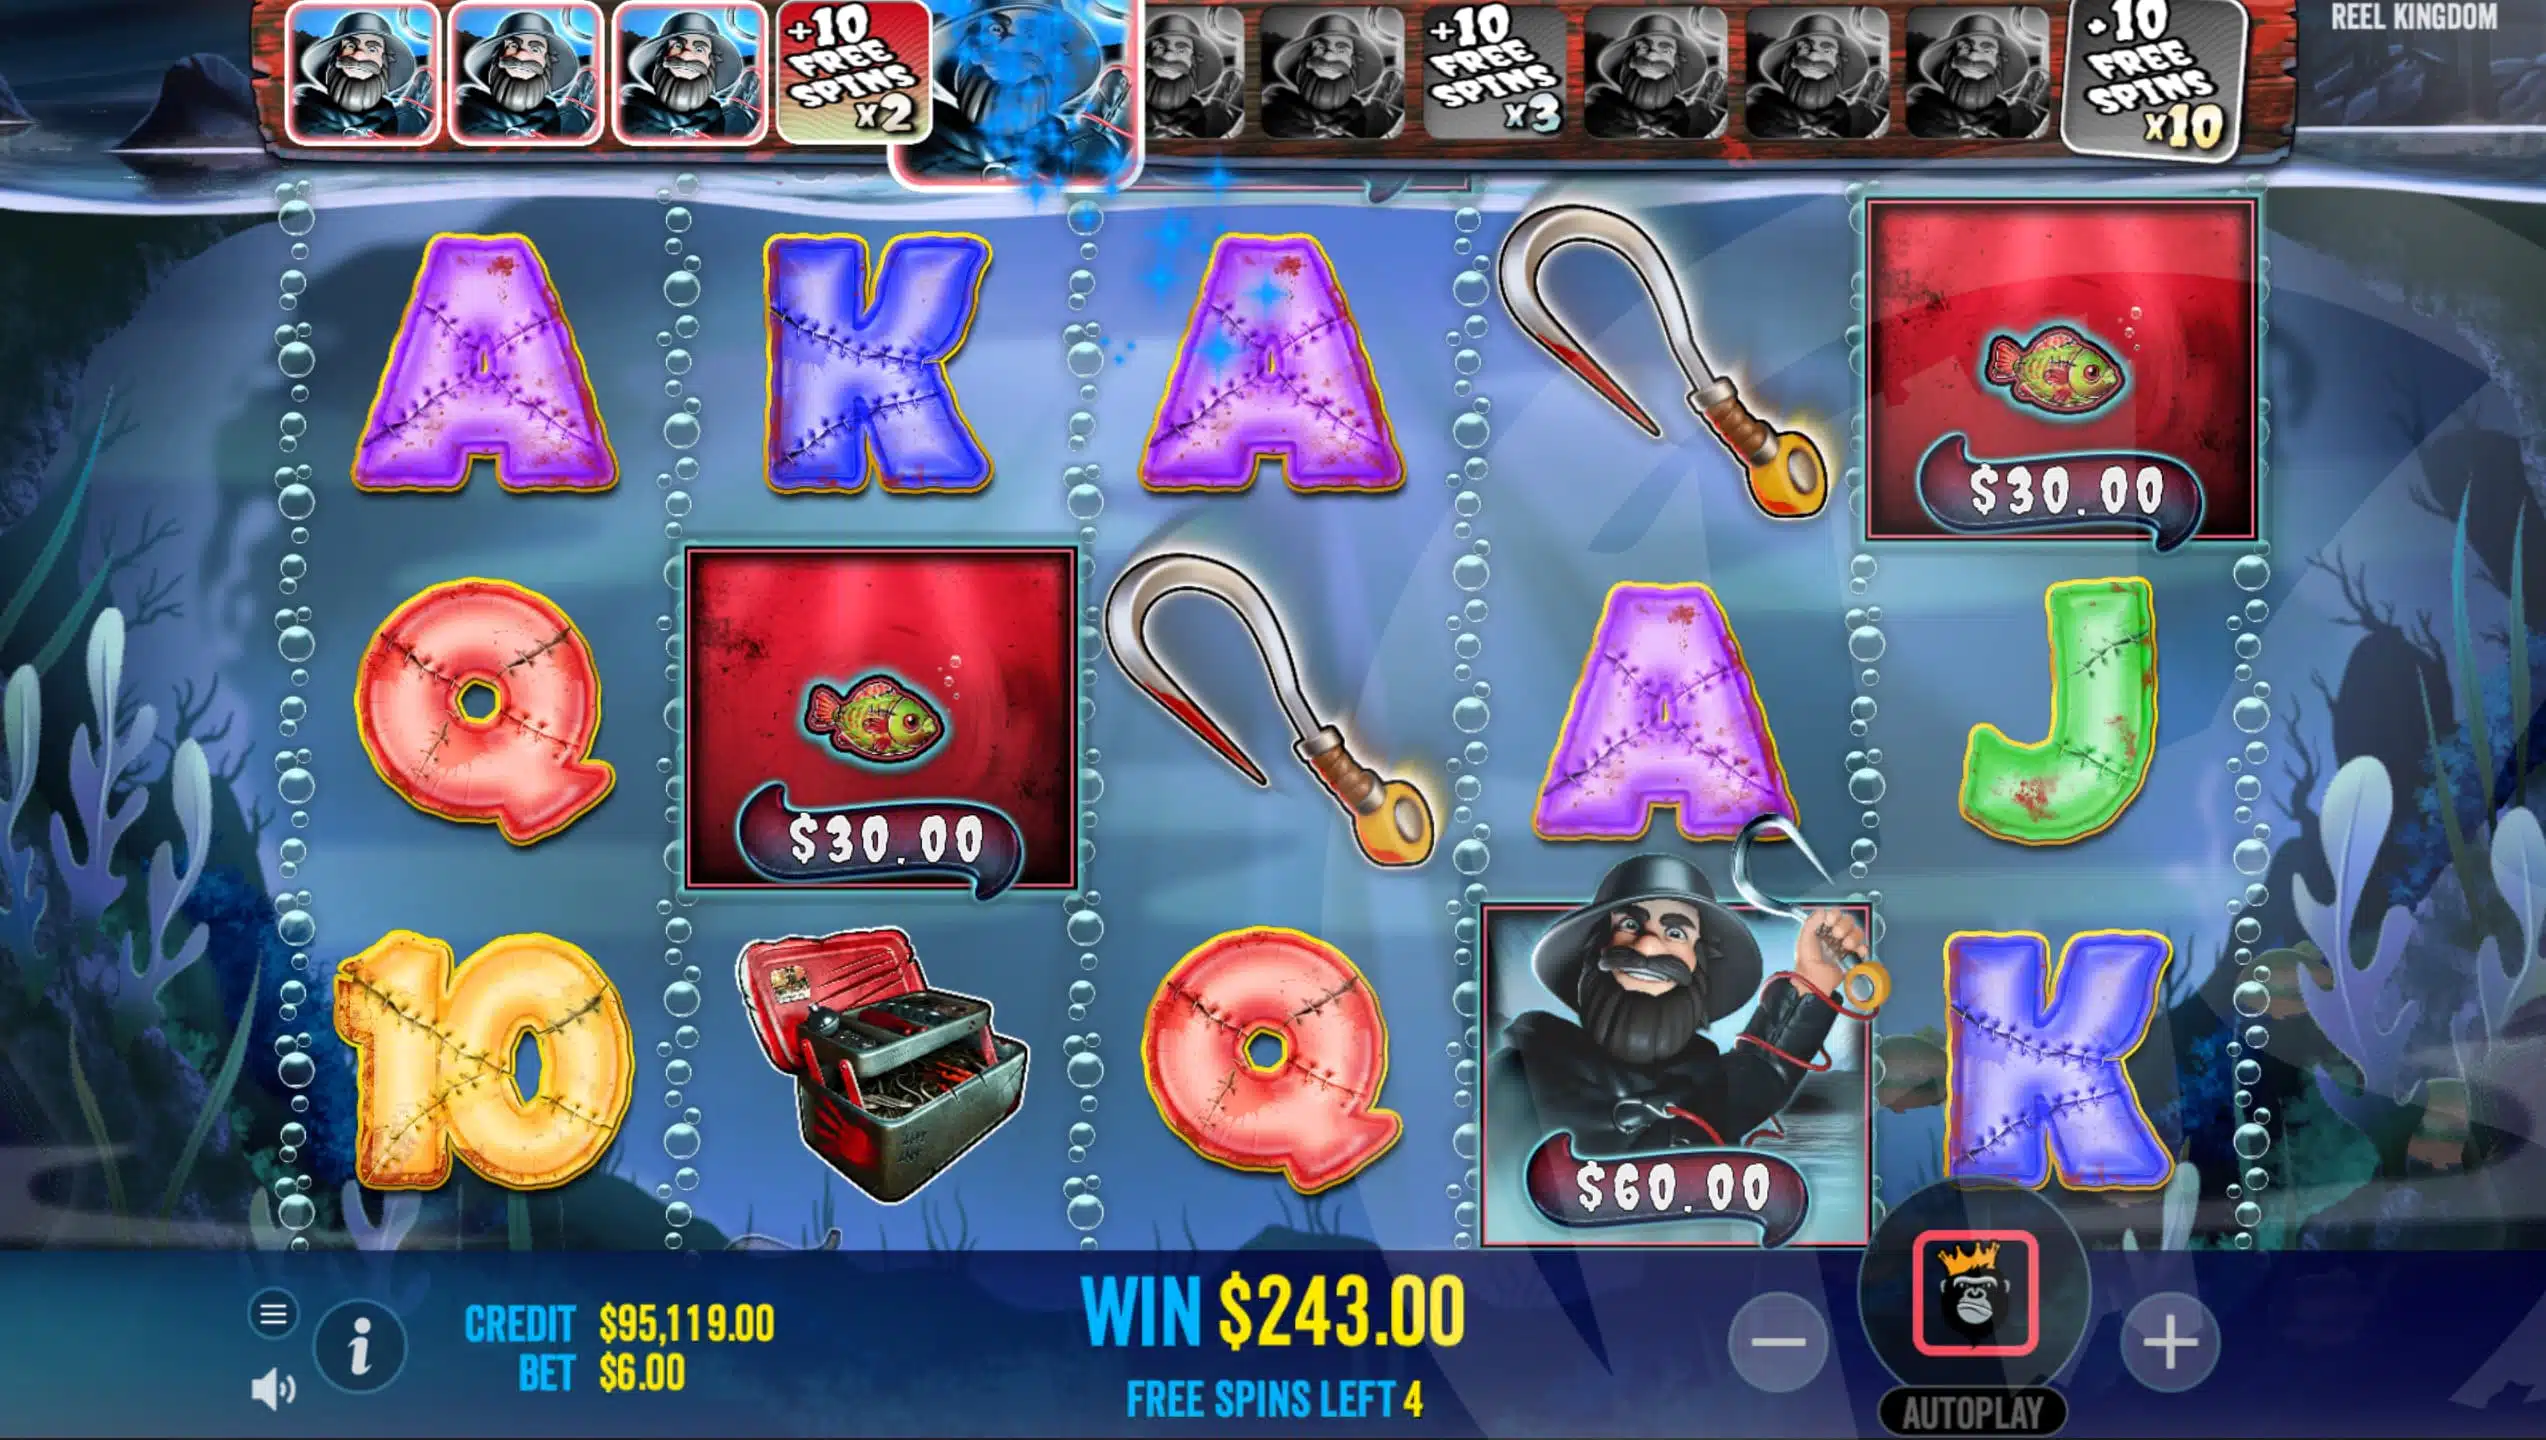 Wild Fisherman Symbols Collect Fish Money Symbol Values and Advance the Meter During Free Spins